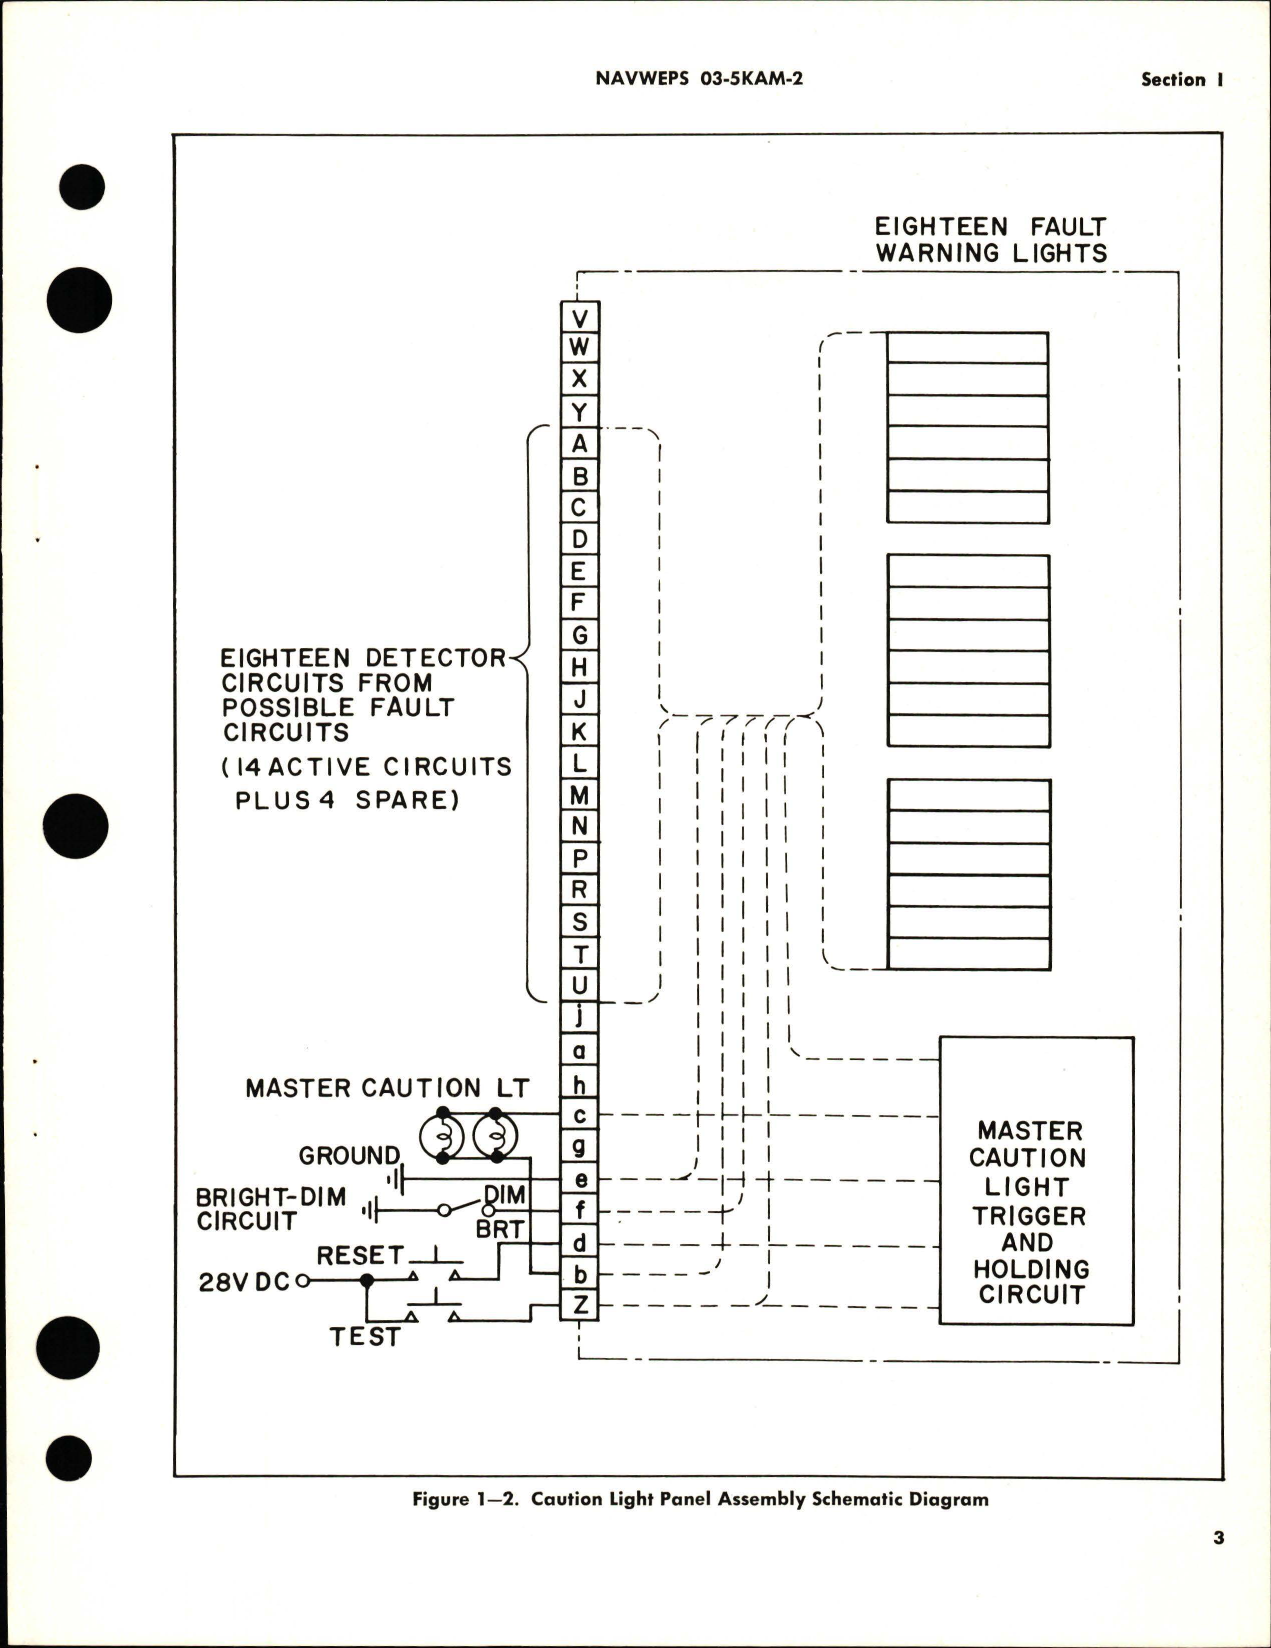 Sample page 7 from AirCorps Library document: Overhaul Instructions for Caution Light Panel Assembly - Parts K683240-1 and K683240-7